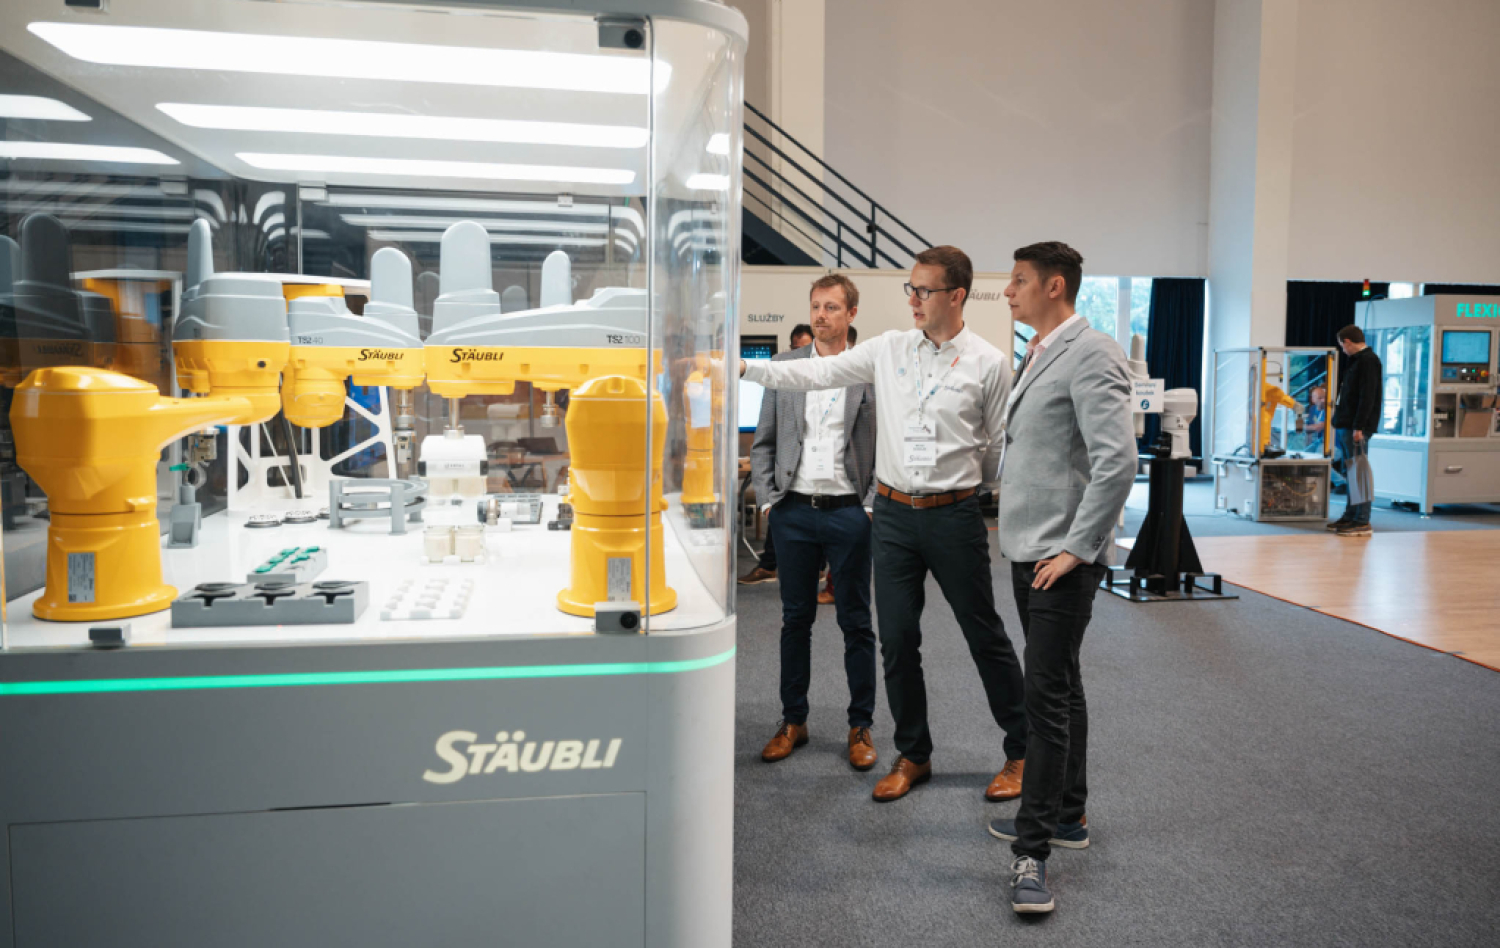 Stubli Technology Days welcomed hundreds of visitors interested in industrial robots and modern technologies